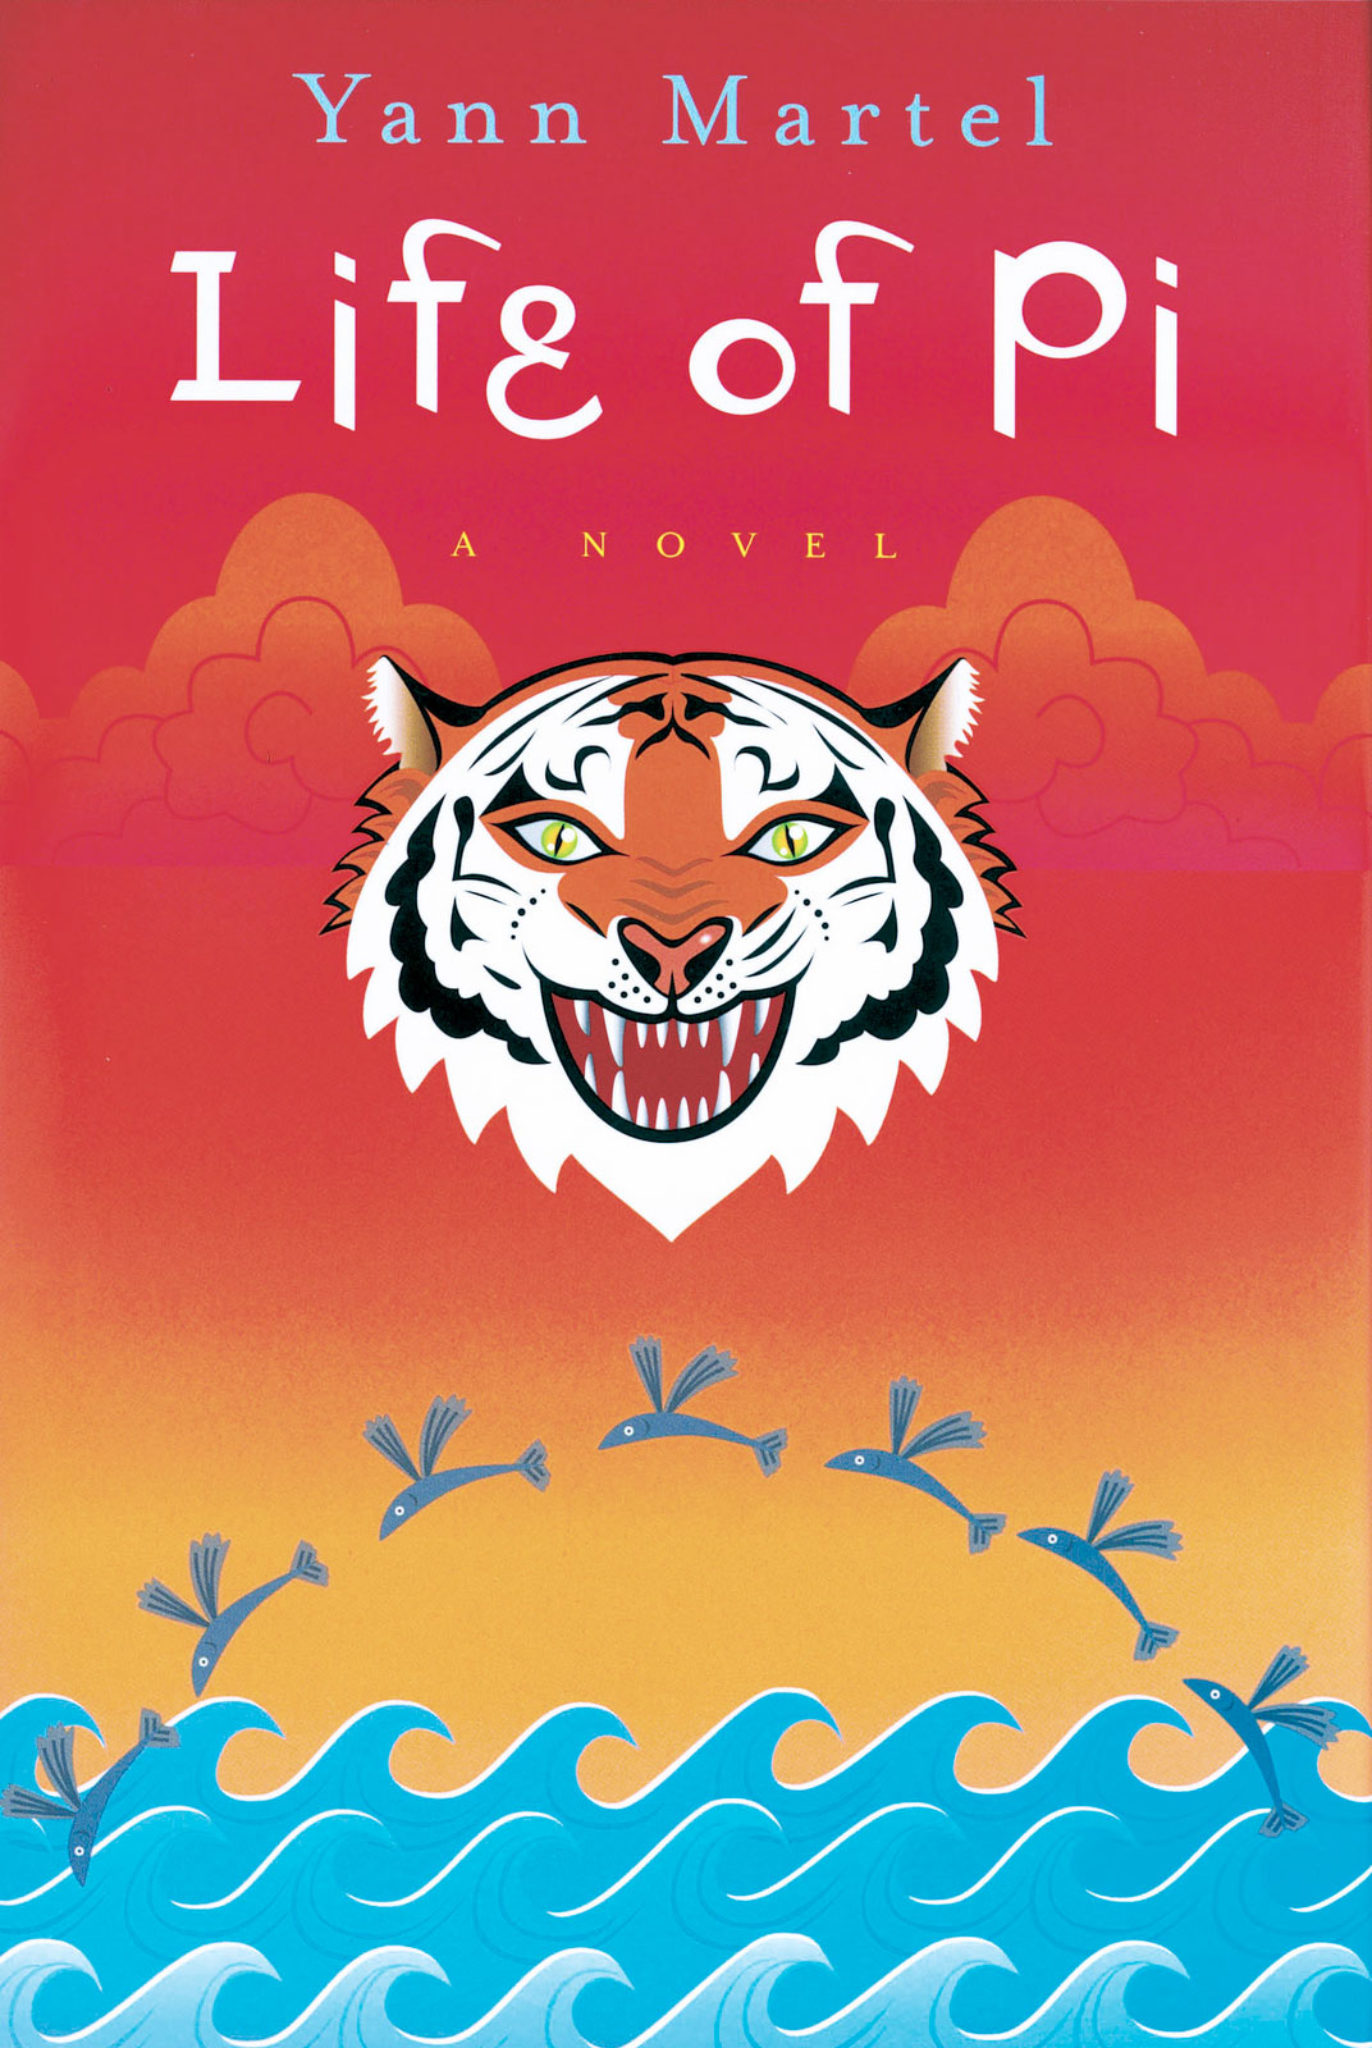 book report on life of pi